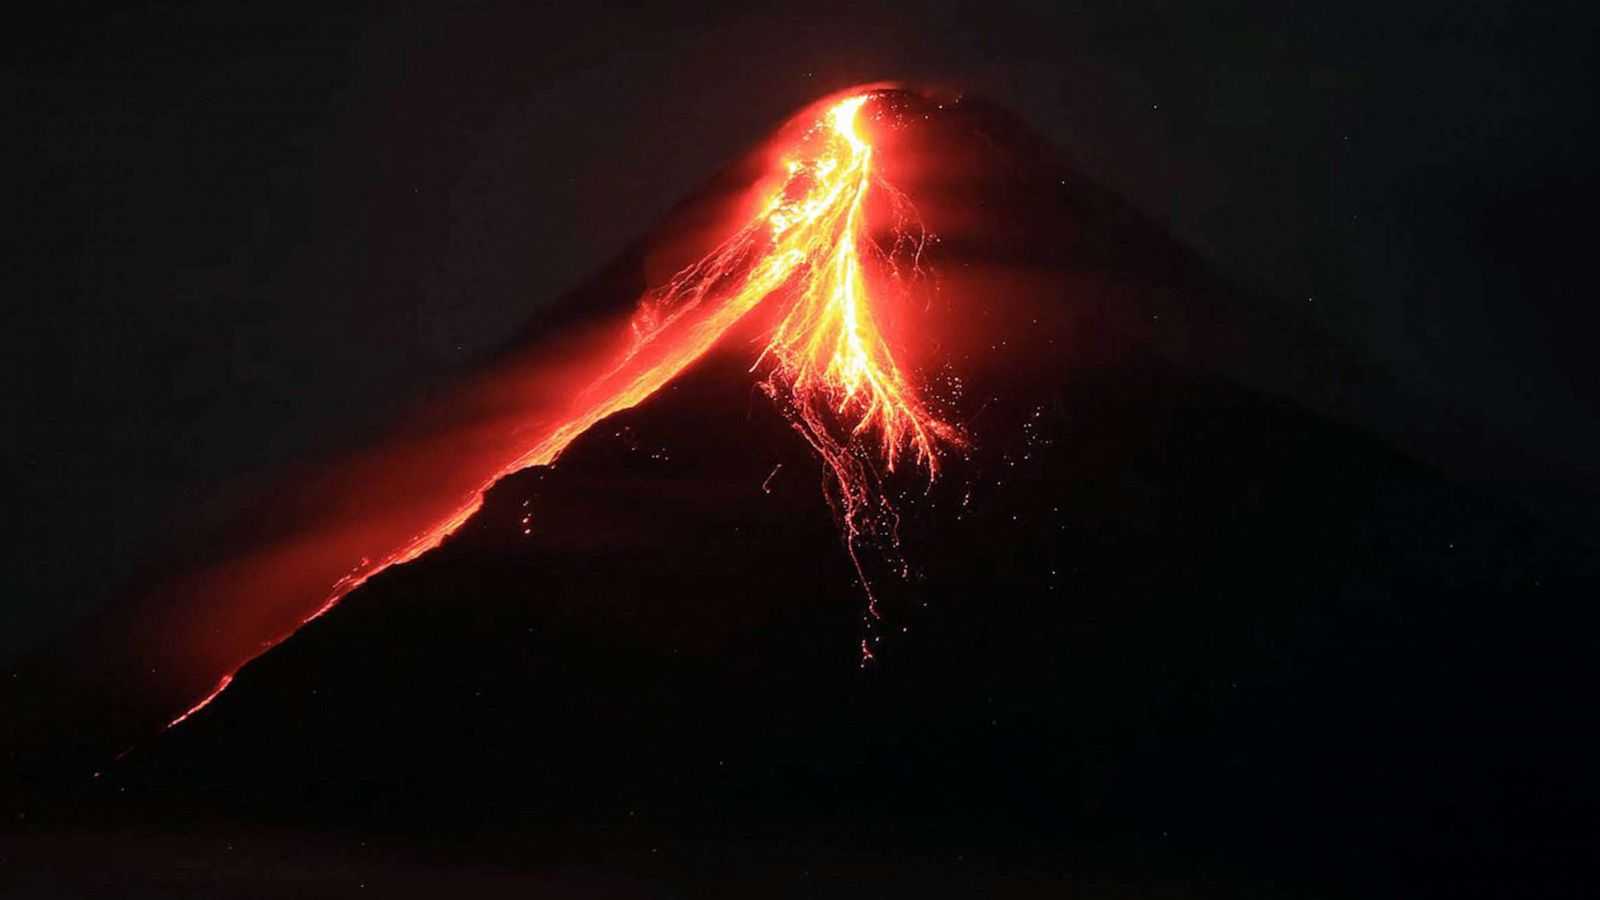 Phivolcs: No volcanic earthquake but slow lava flow continues in Mayon Volcano